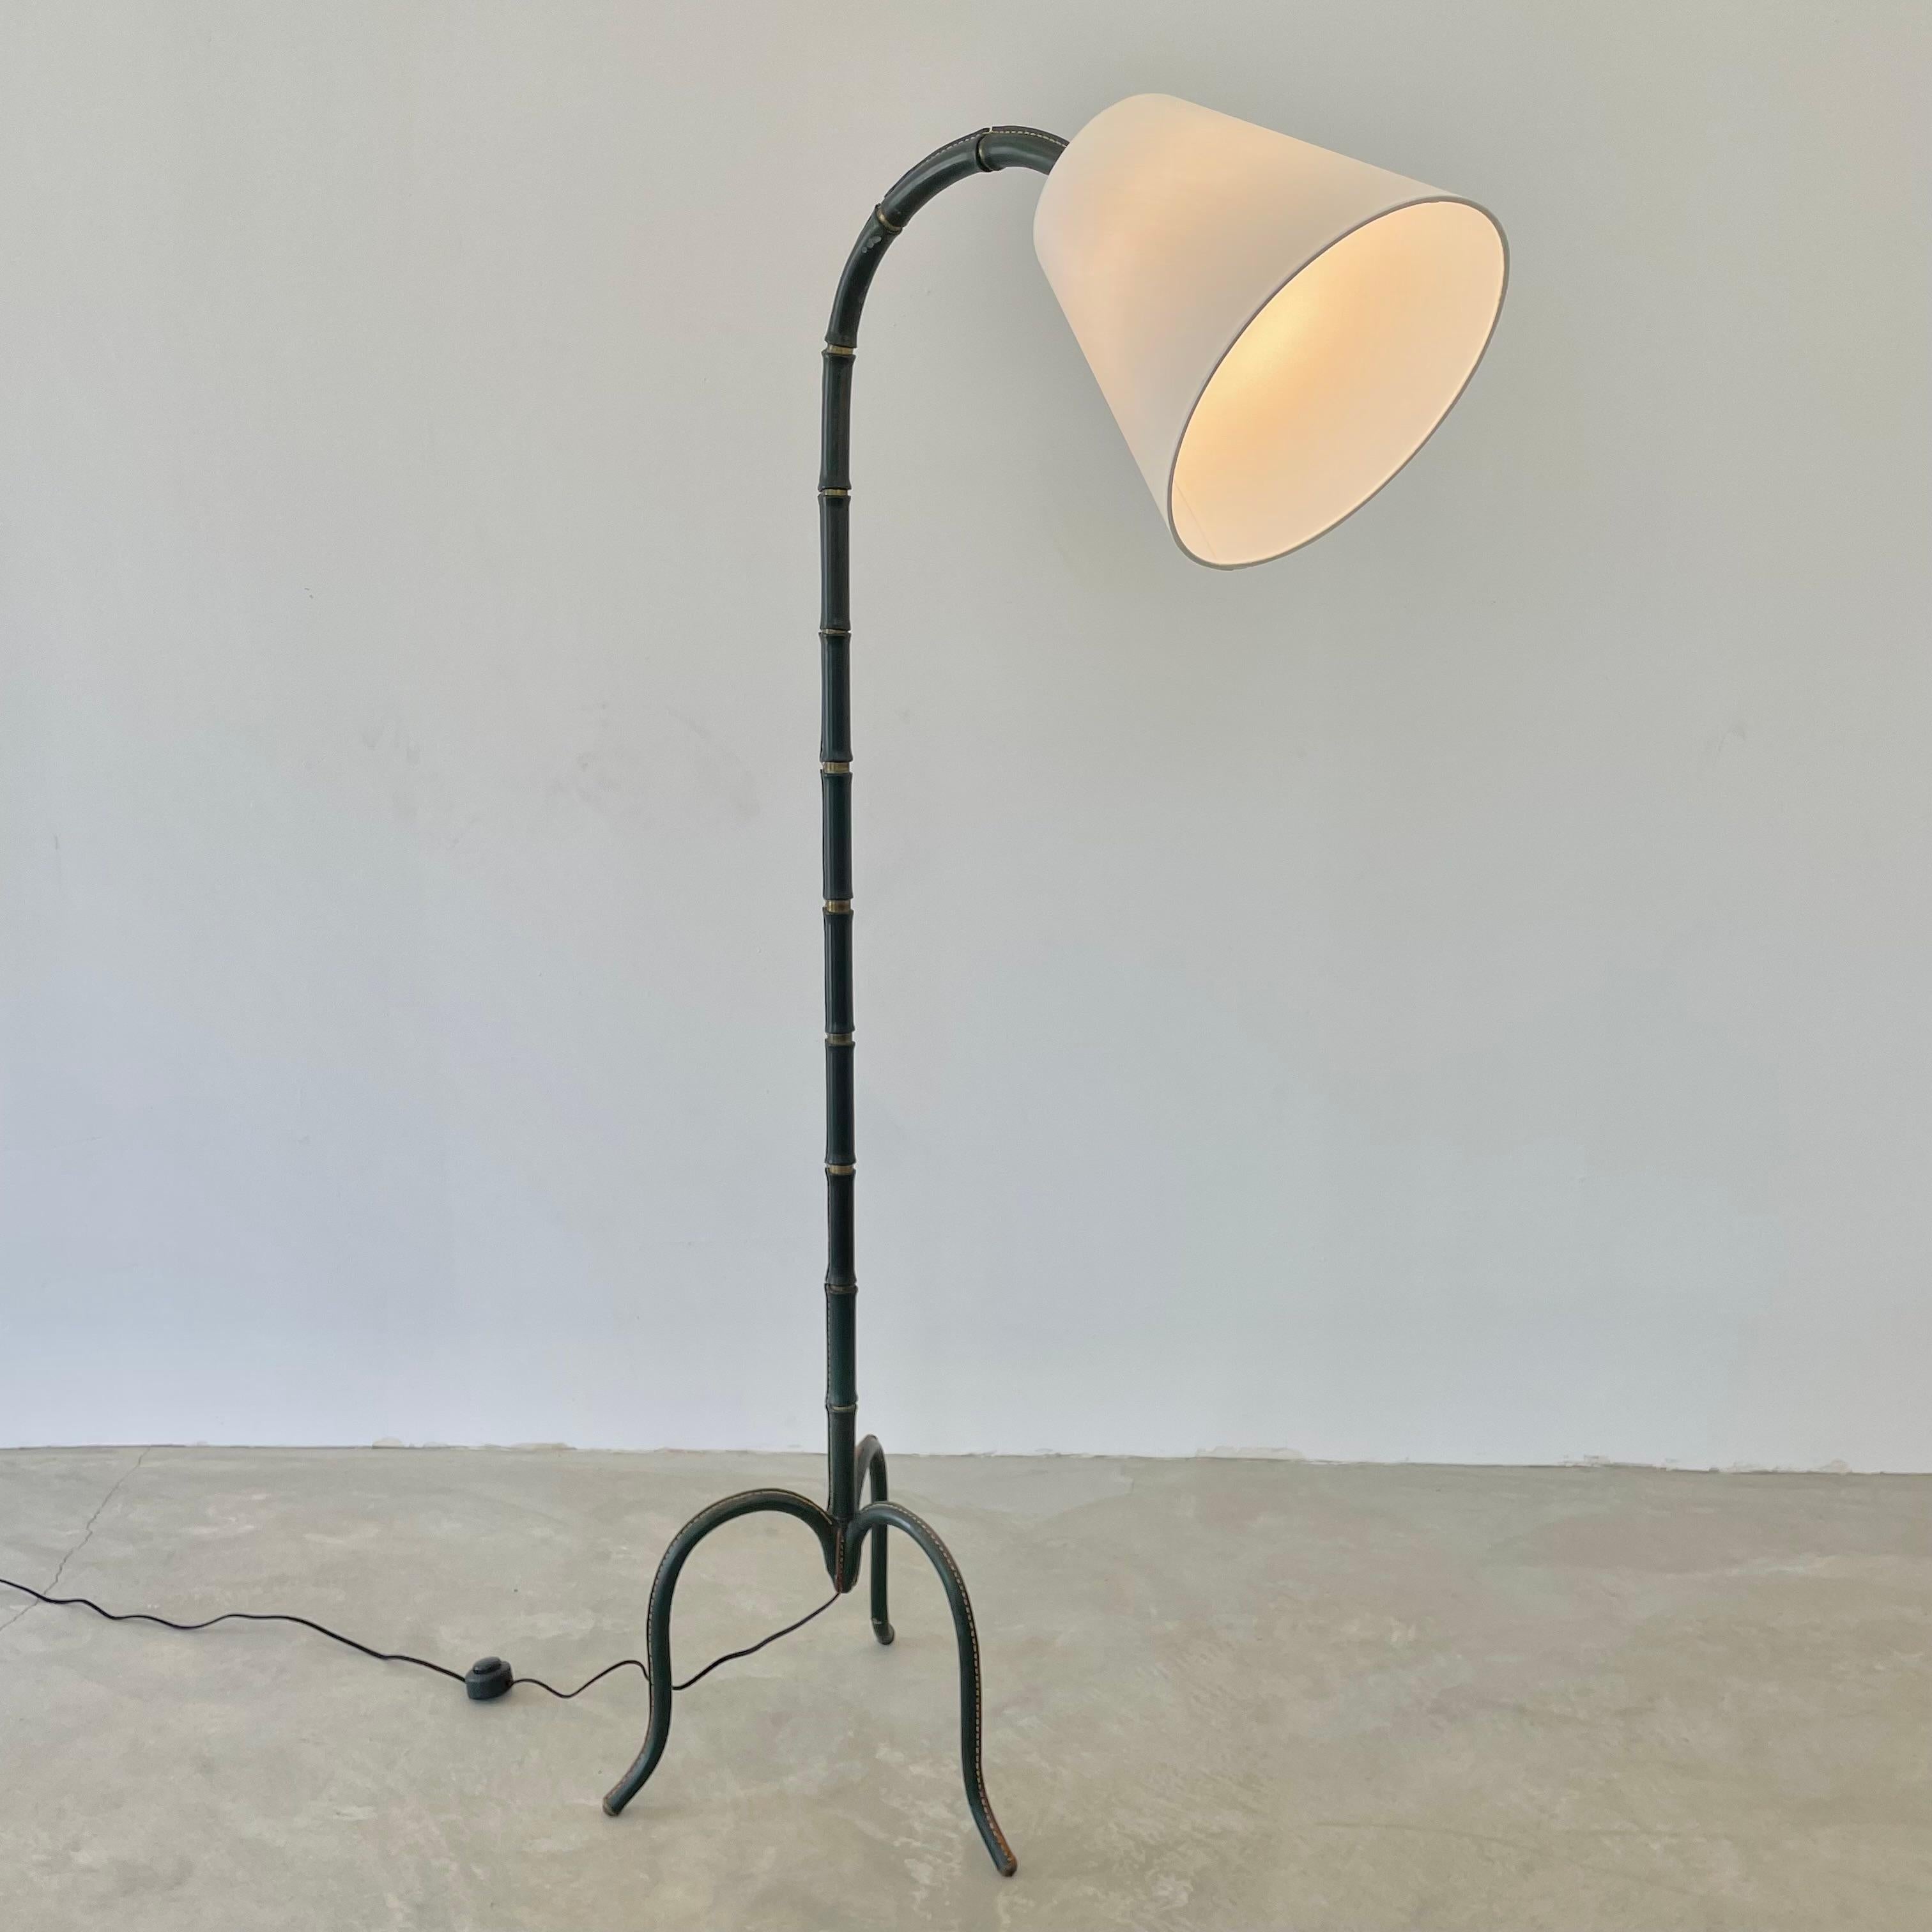 Handsome curved floor lamp completely wrapped in a deep green leather by French designer Jacques Adnet. Made in France in the 1950s. Brass ball joint above the socket allowing to direct the light. Leather is wrapped in a way that gives a bamboo look